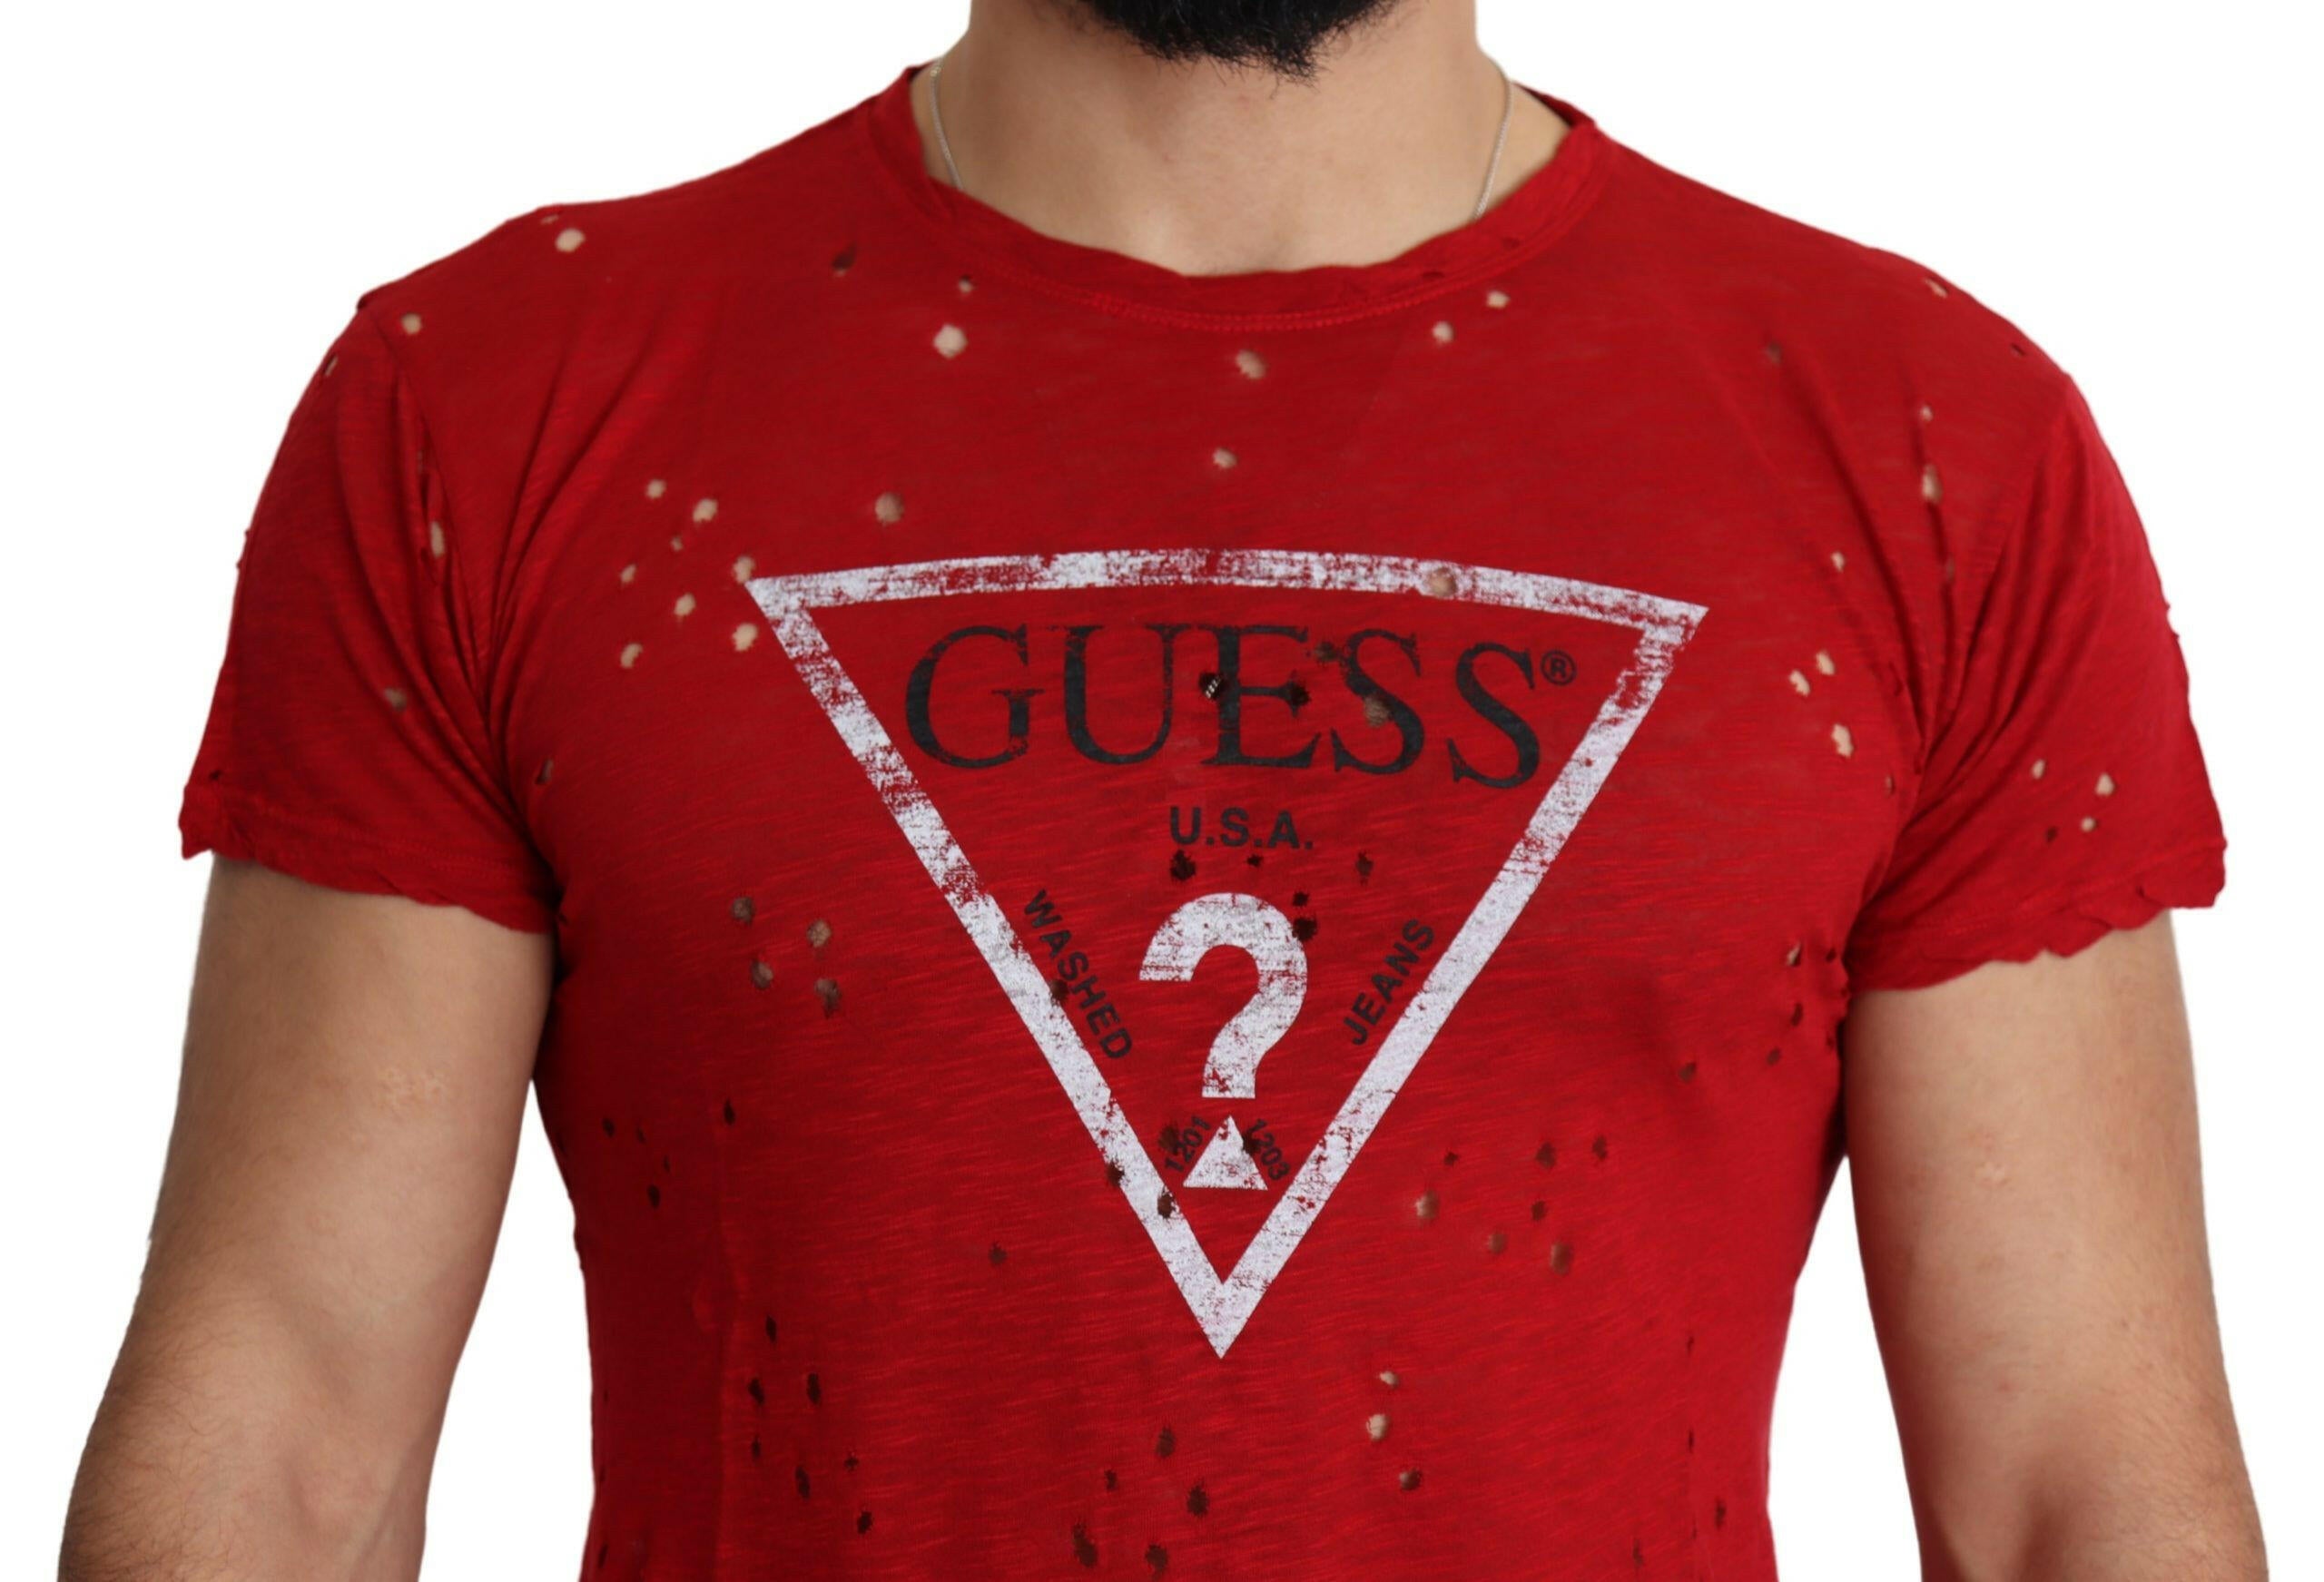 Guess Radiant Red Cotton Stretch T-Shirt.